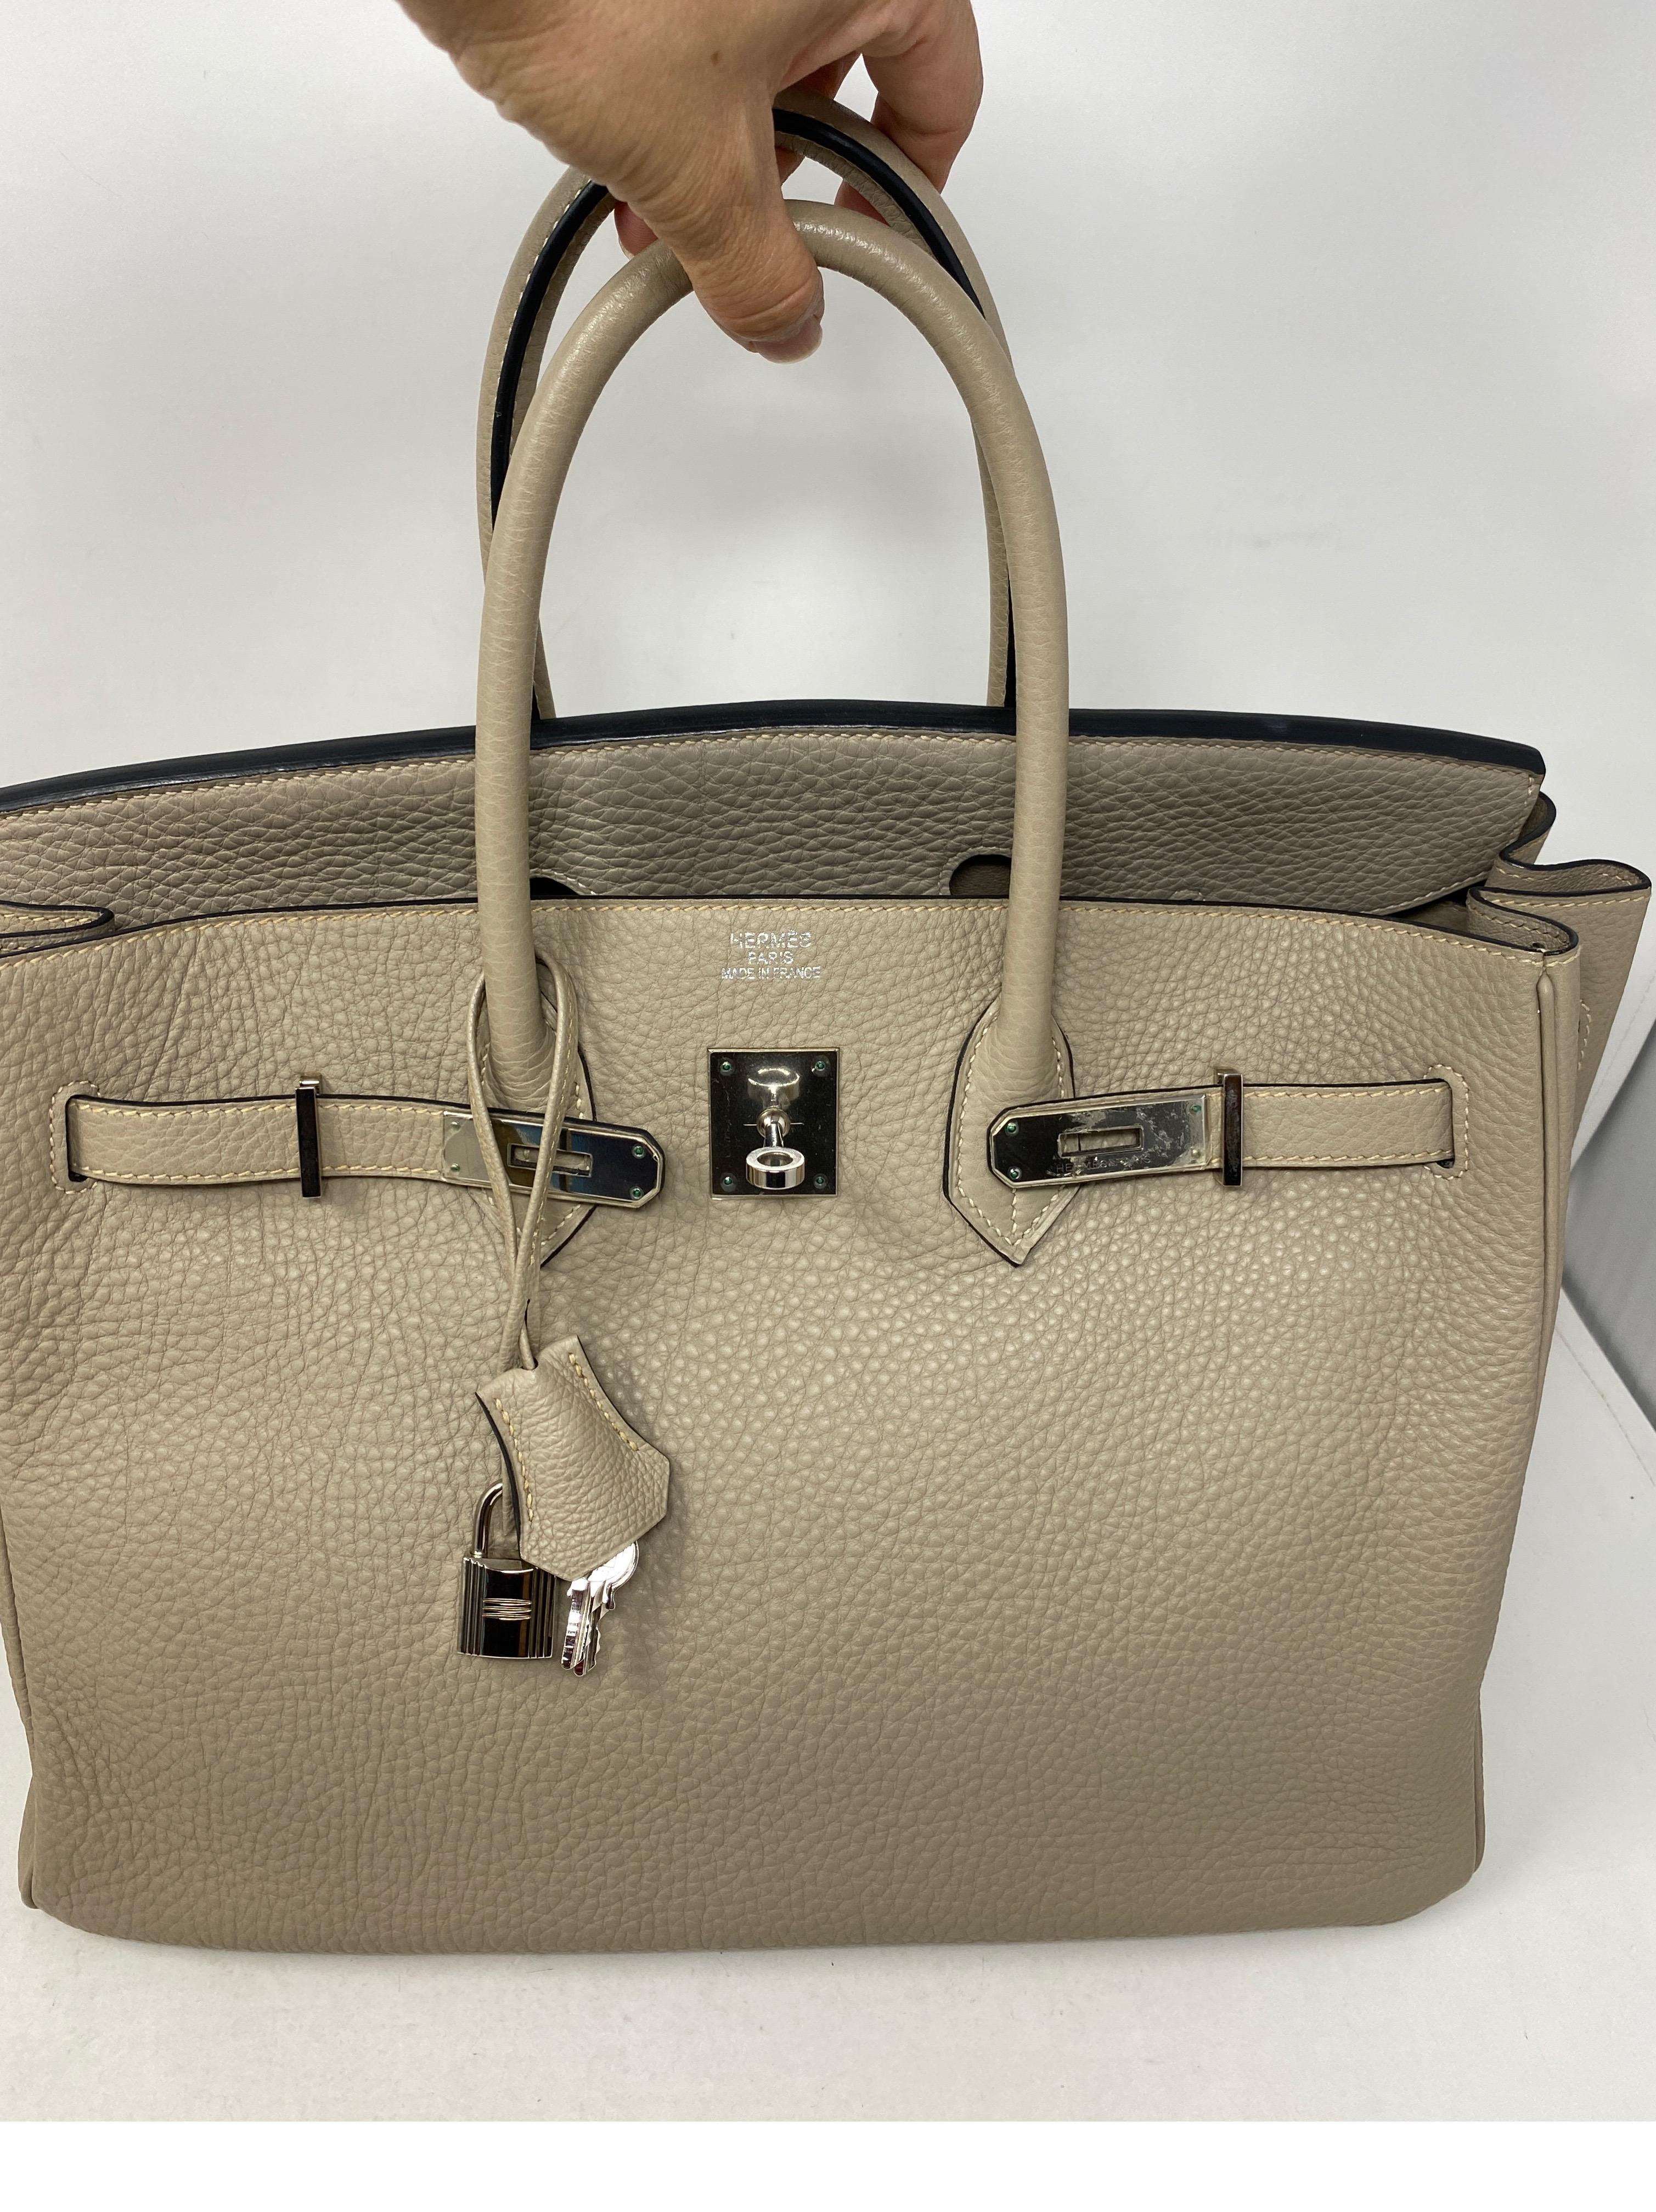 Hermes Griss Birkin 35 Bag. Togo leather. Palladium hardware. Plastic still on hardware. Excellent condition. Looks like new. Includes clochette, lock, keys, and dust cover. Guaranteed authentic. 